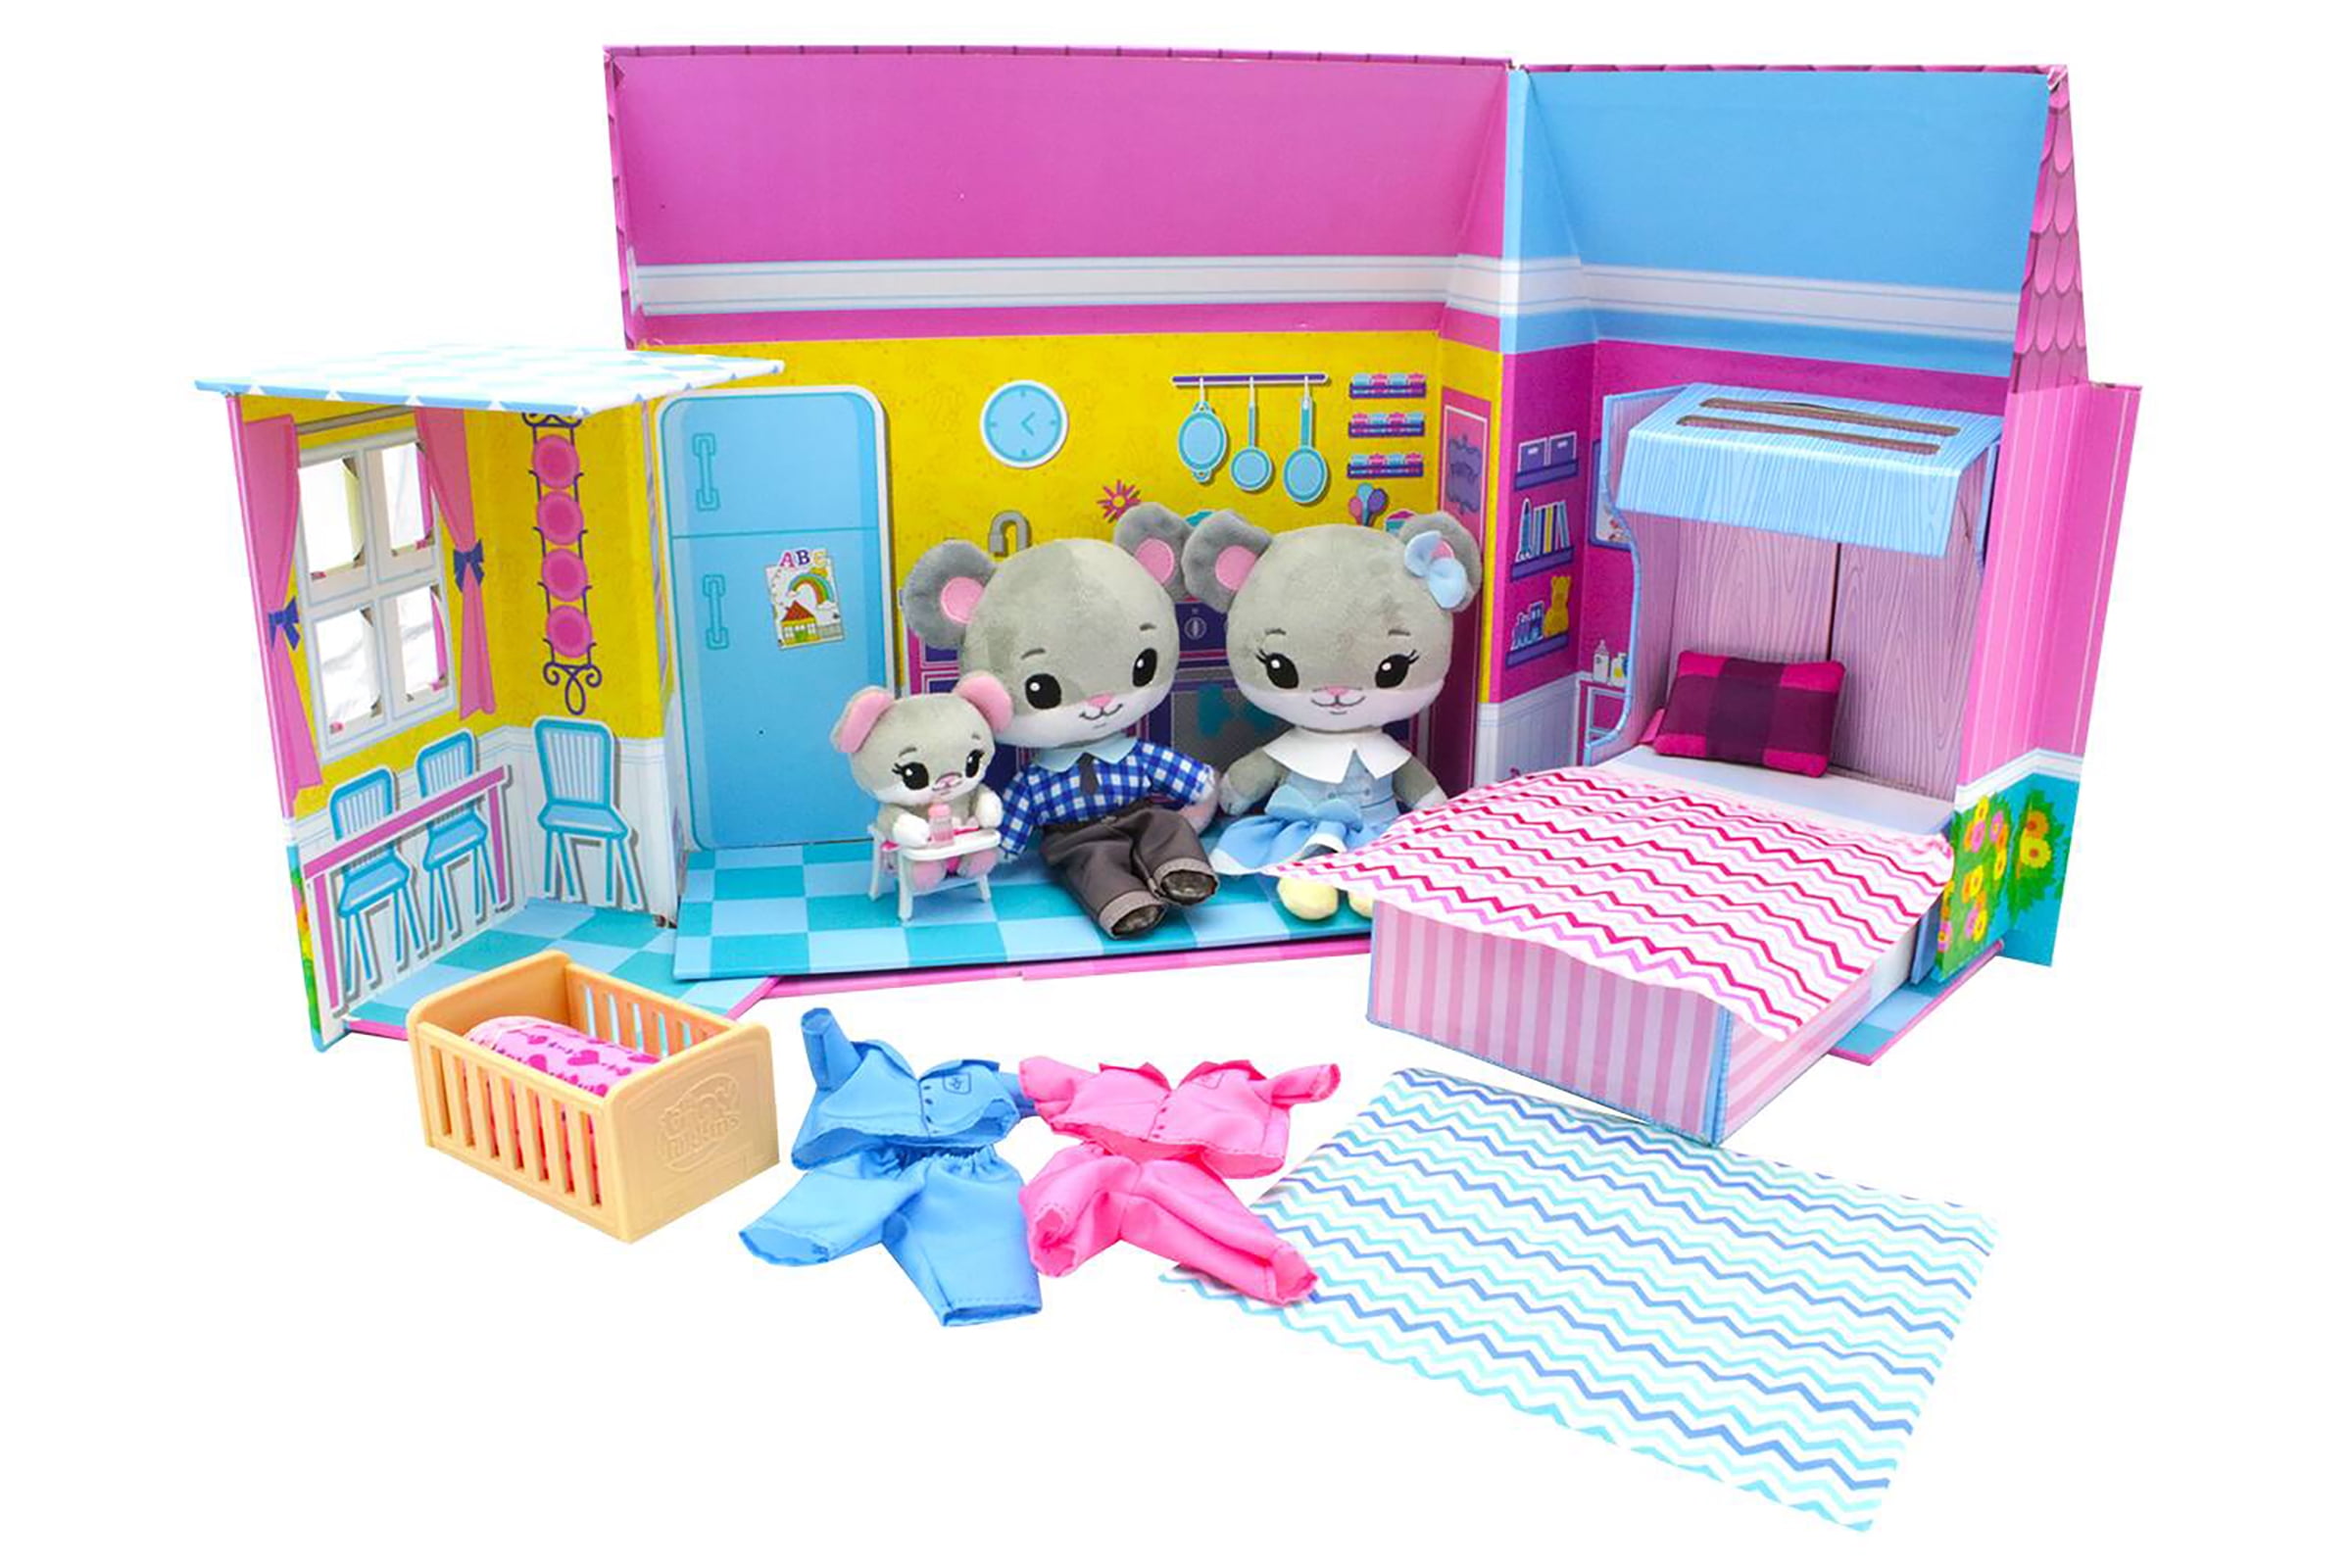 Tiny Tukkins Playset Assortment with Plush Stuffed Character Mouse 